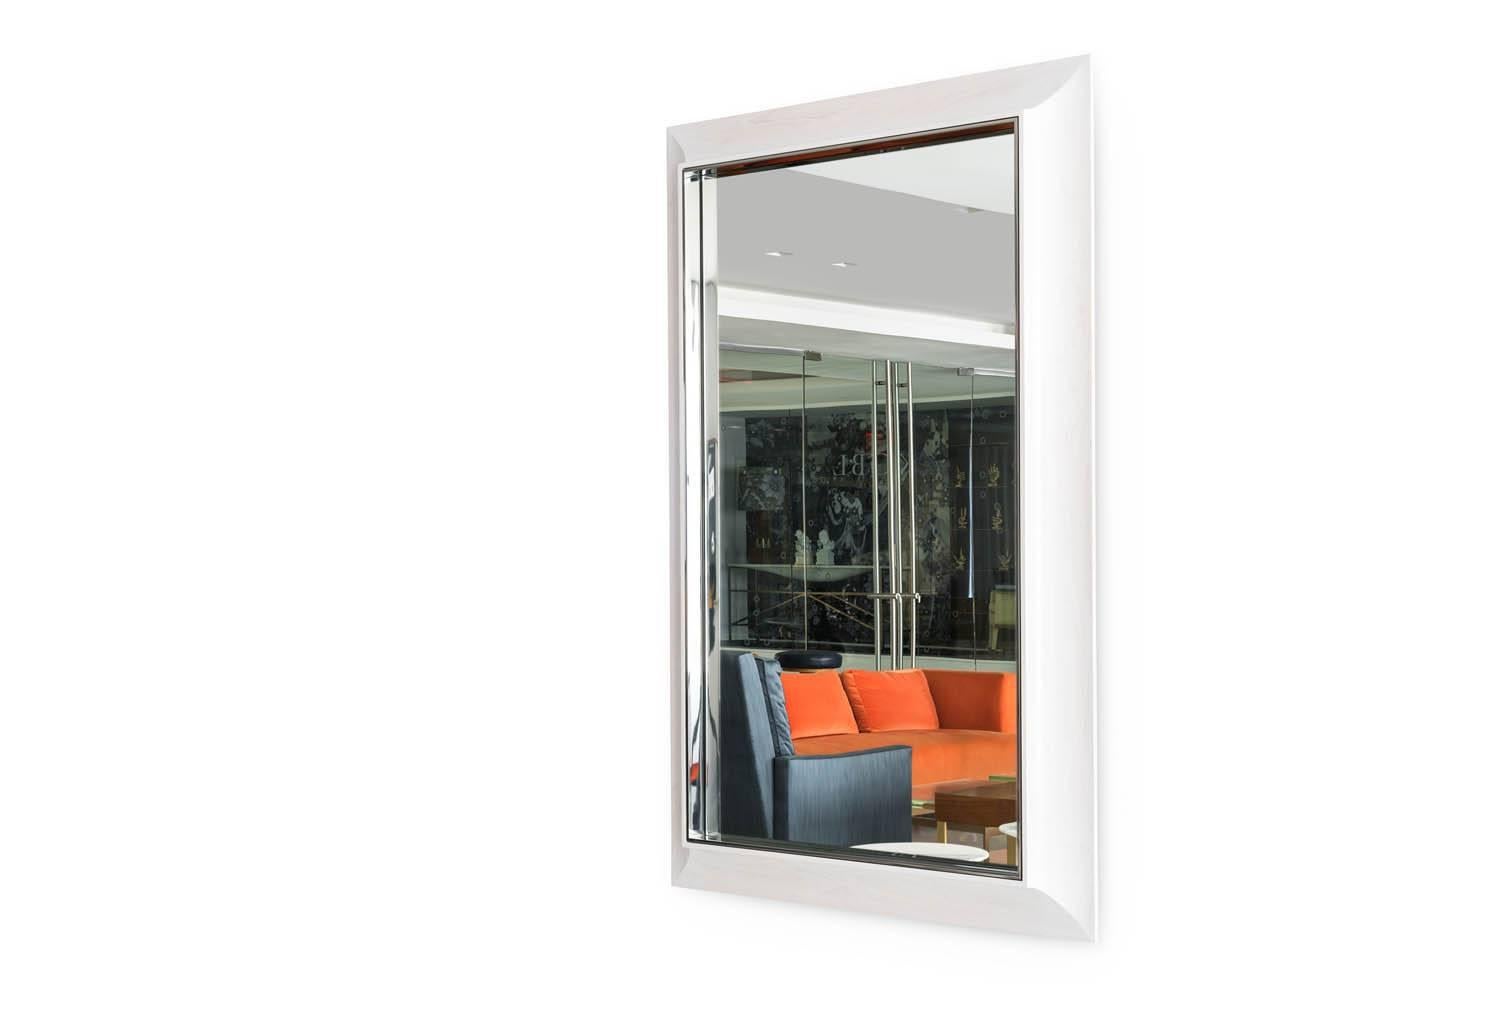 The Zamora Mirror is designed to extend the surface of the mirror onto the frame, via a highly polished stainless surround. The solid maple frame has a translucent stain which reveals the beauty of the wood grain. Shown in a White Stained Maple.